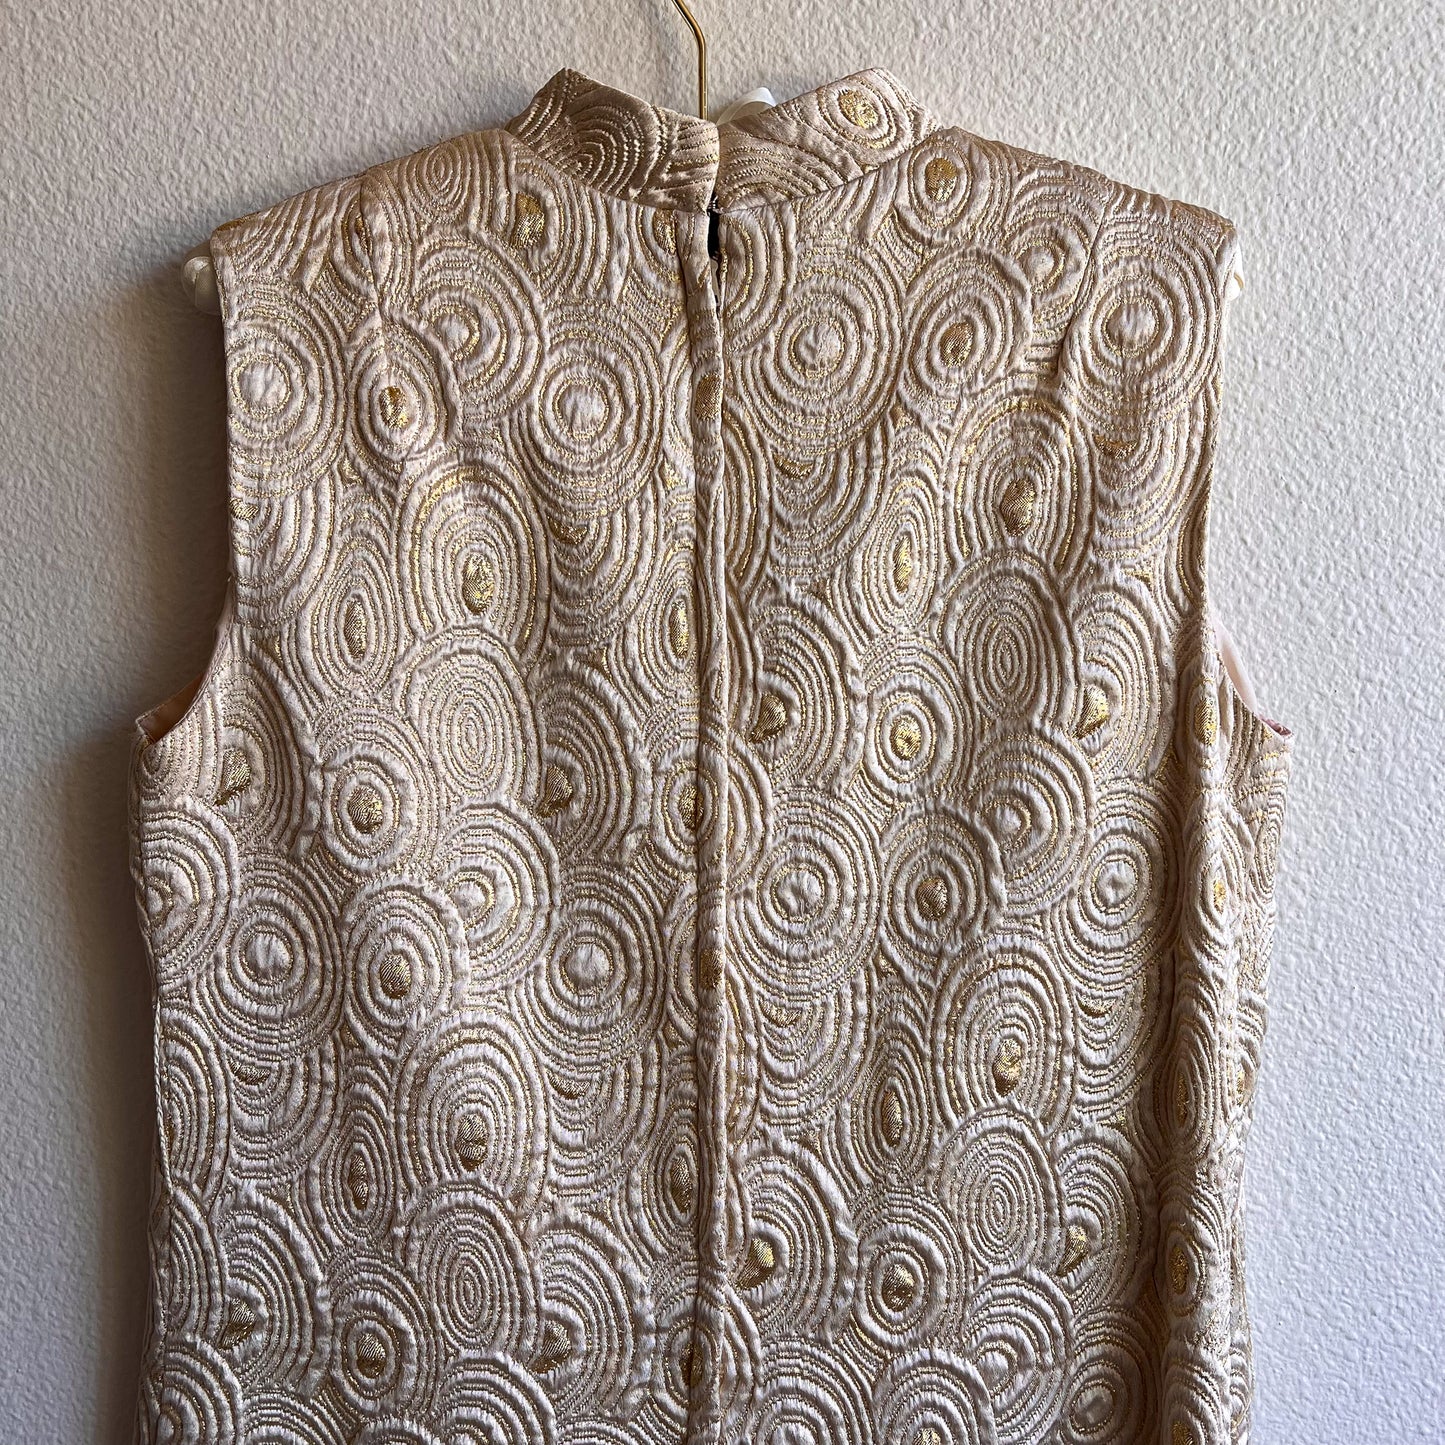 Stunning 1960s Silver and Gold Patterned Shift Dress (S/M)